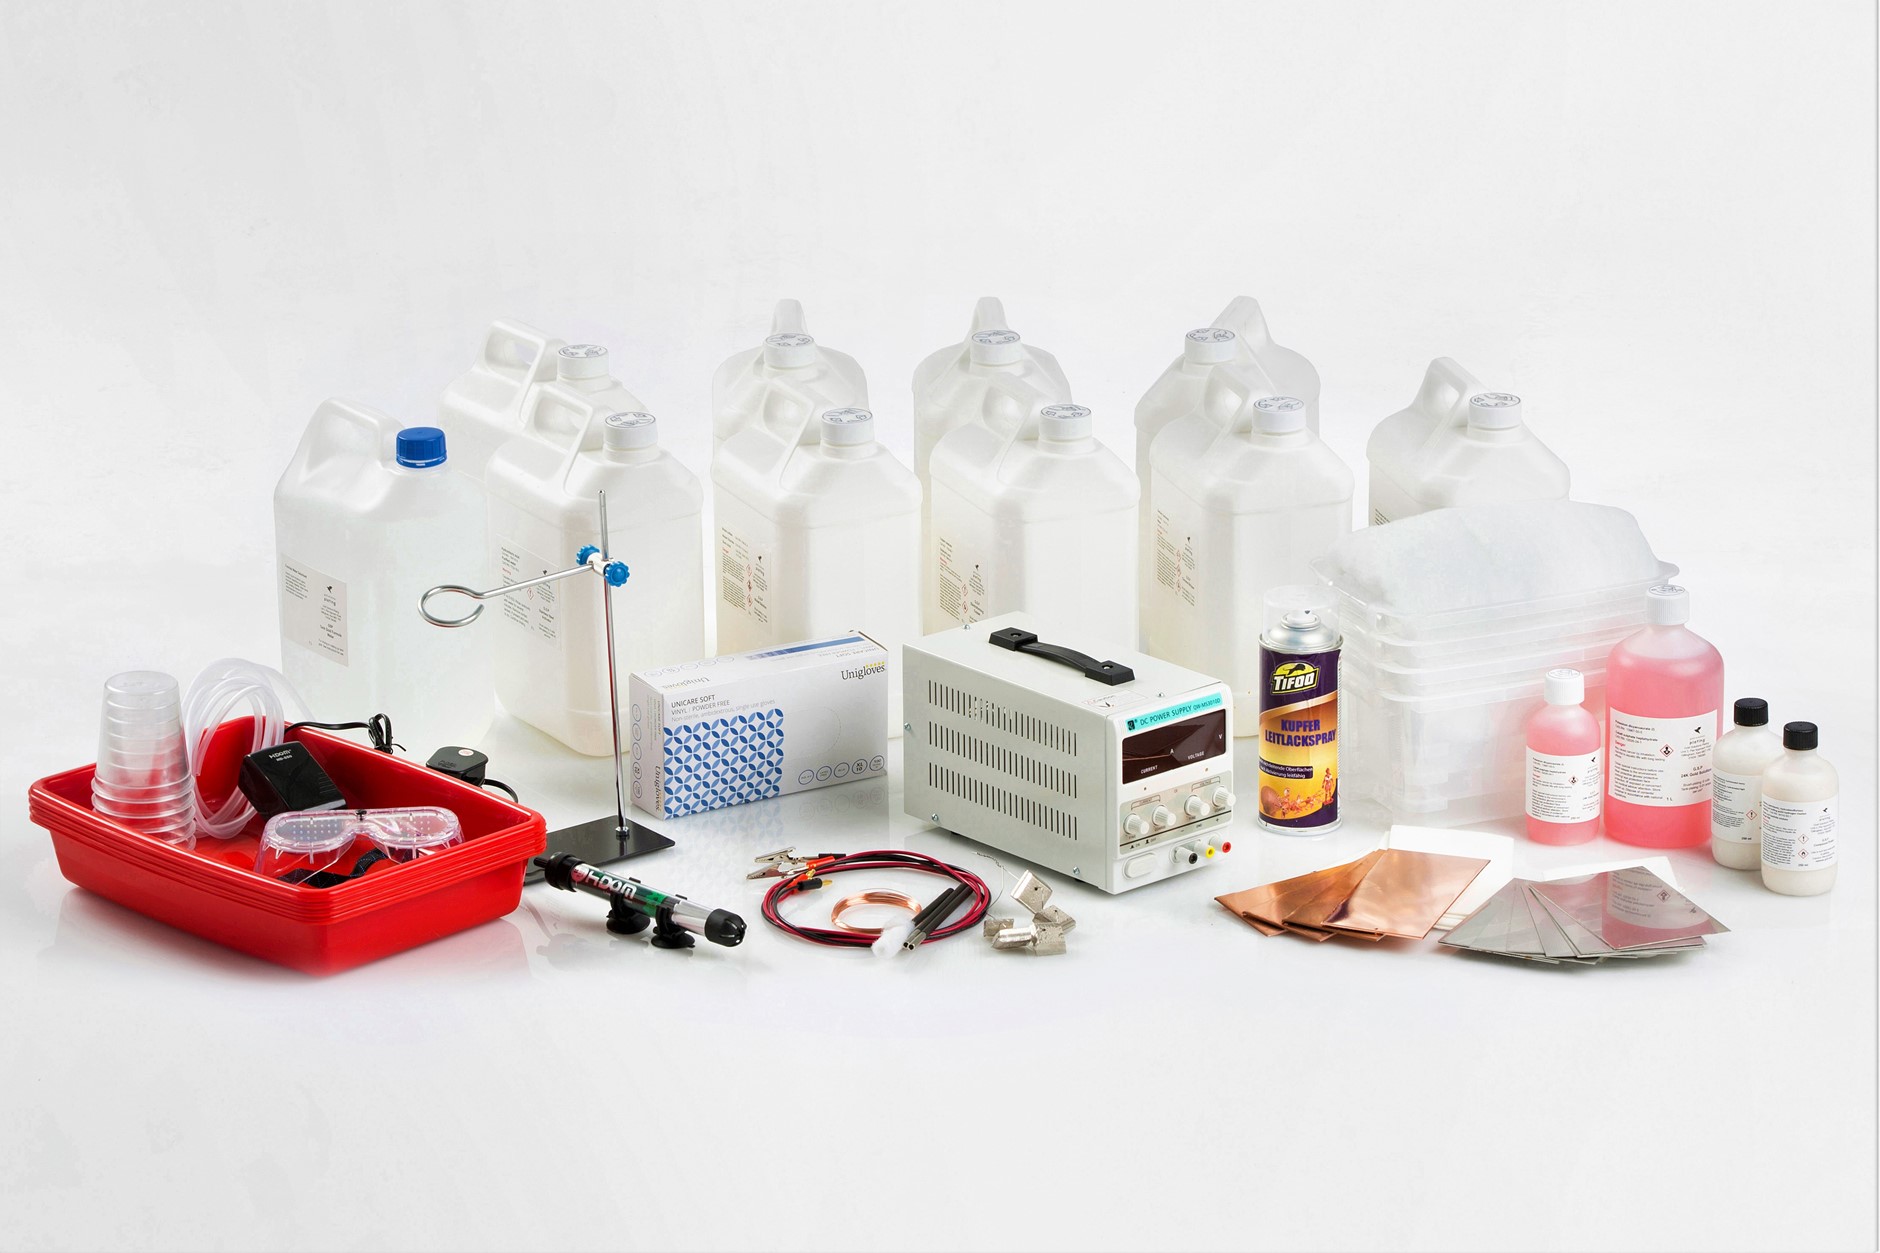 GSP Prodigy 5 litre Electroforming and Electroplating Kit Contents